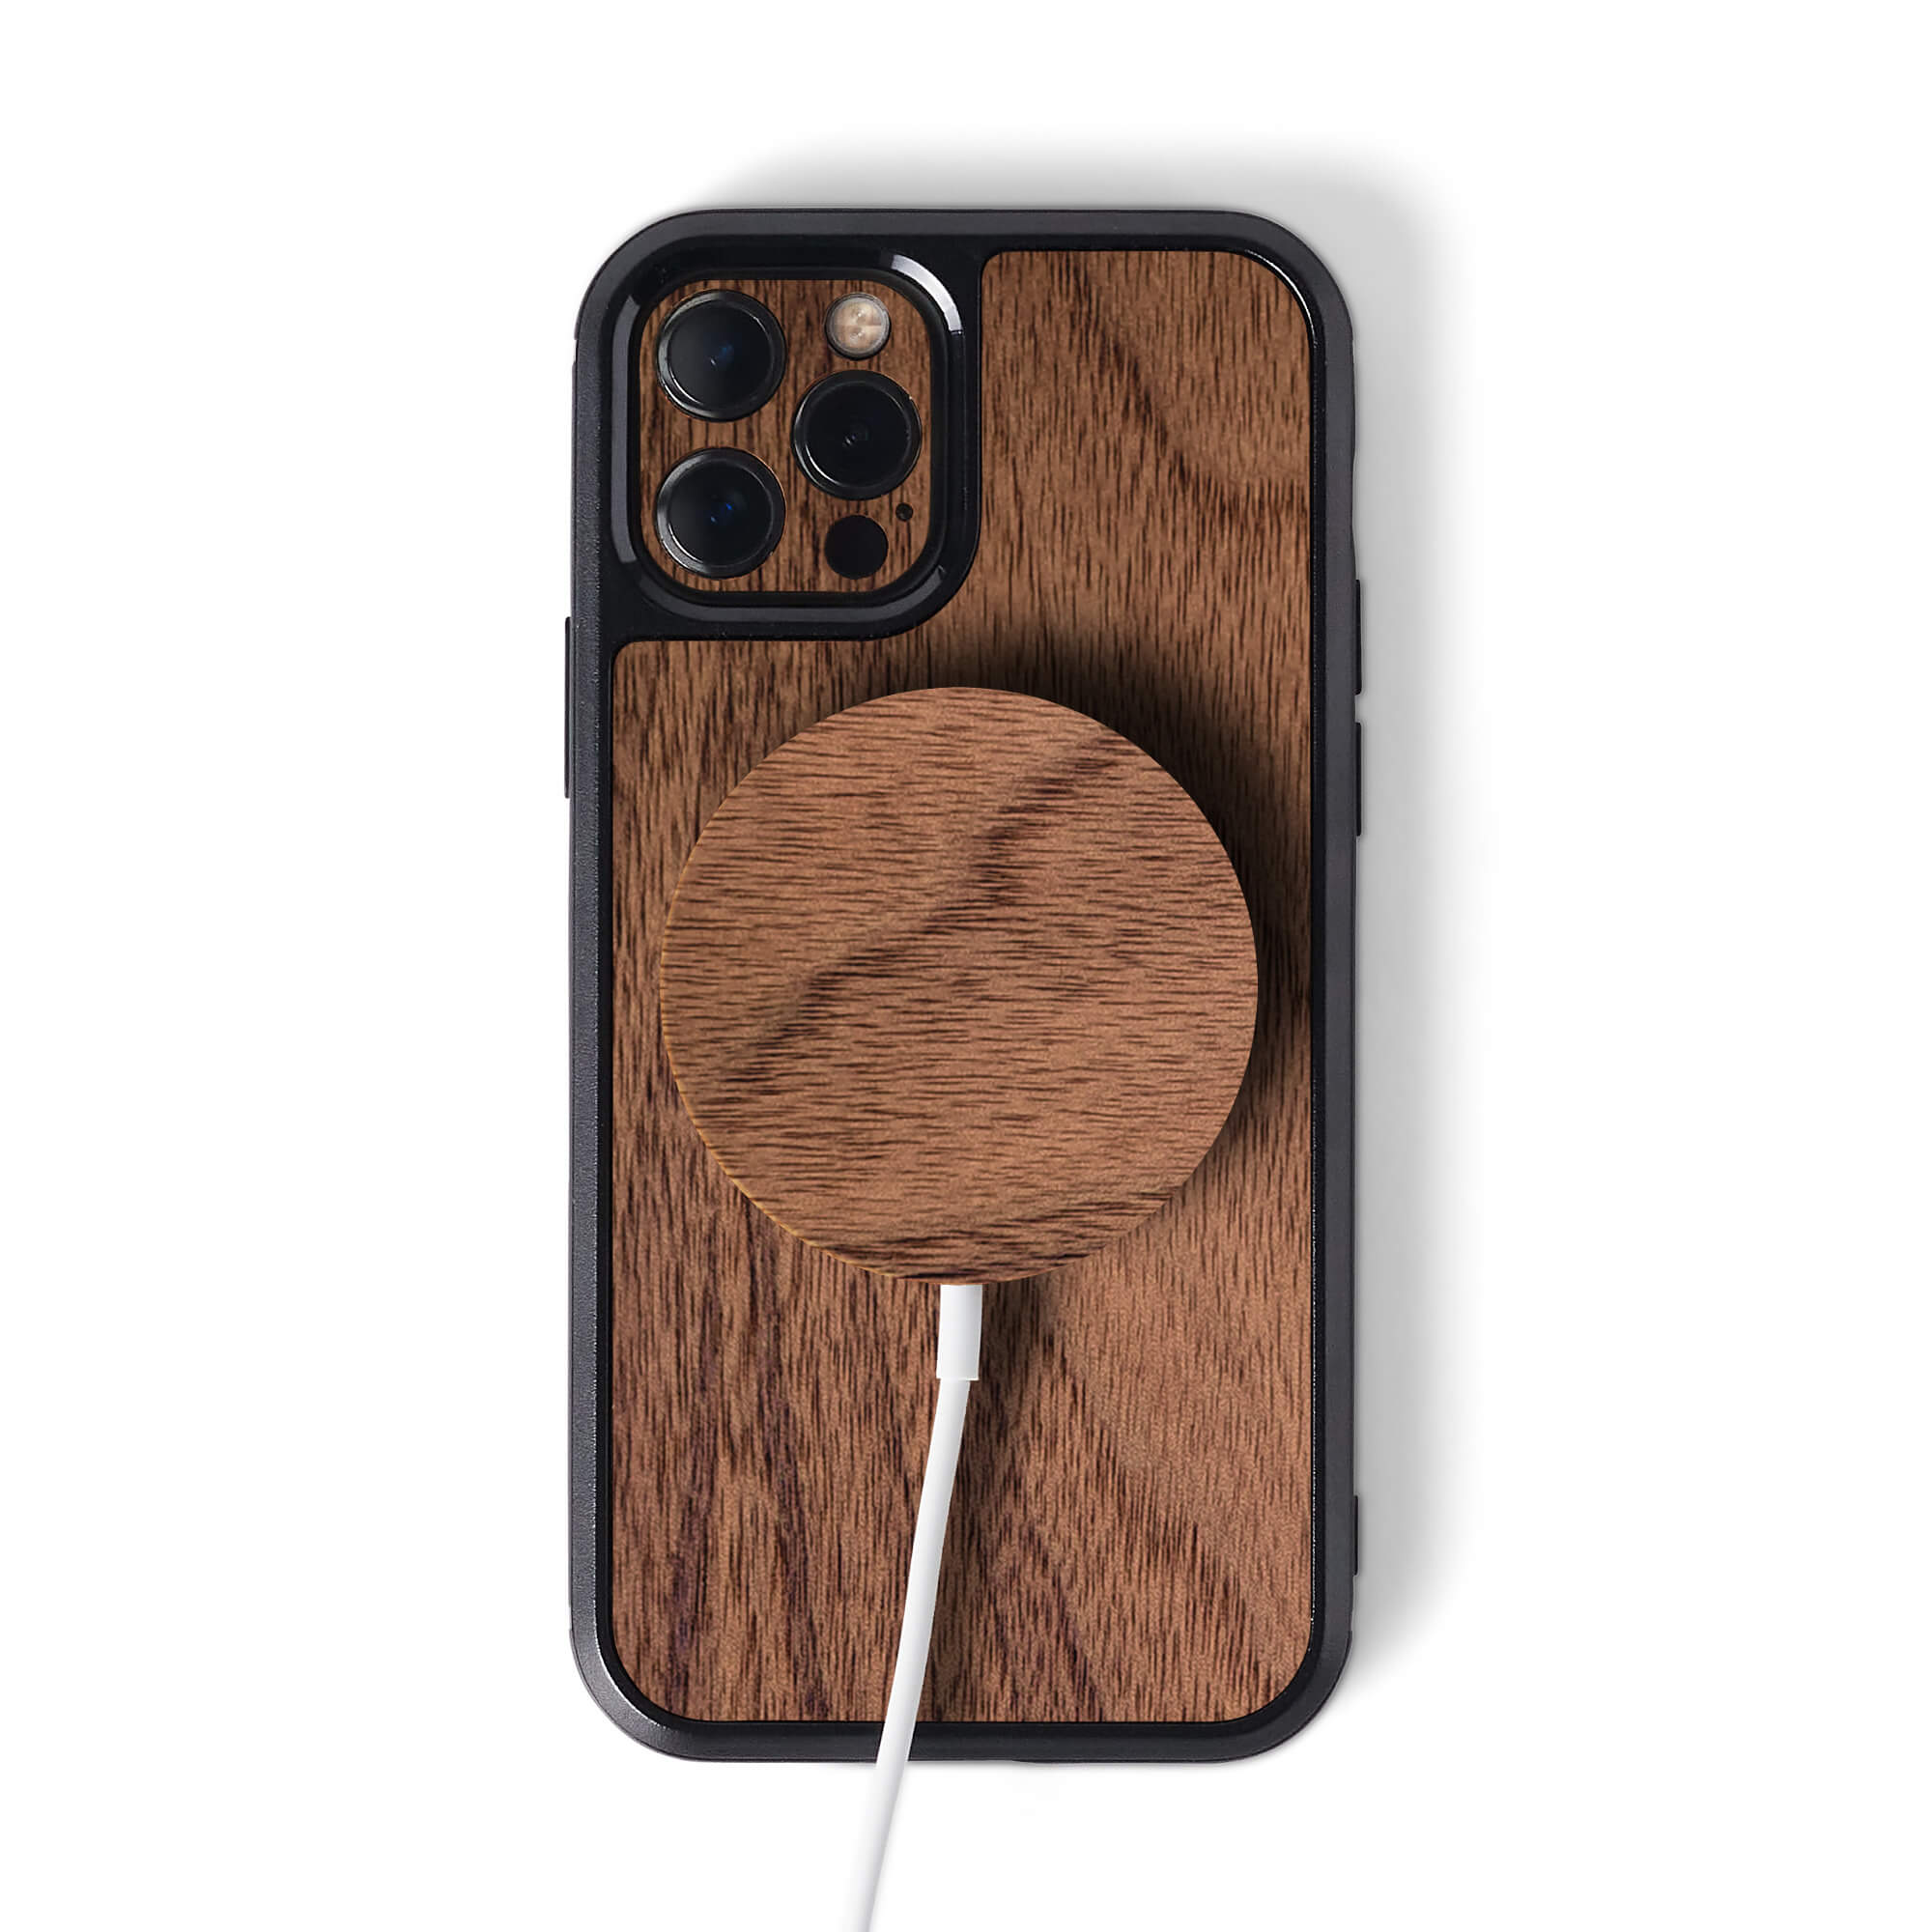 Real Wood iPhone Cases. Fully customizable. How do you want yours